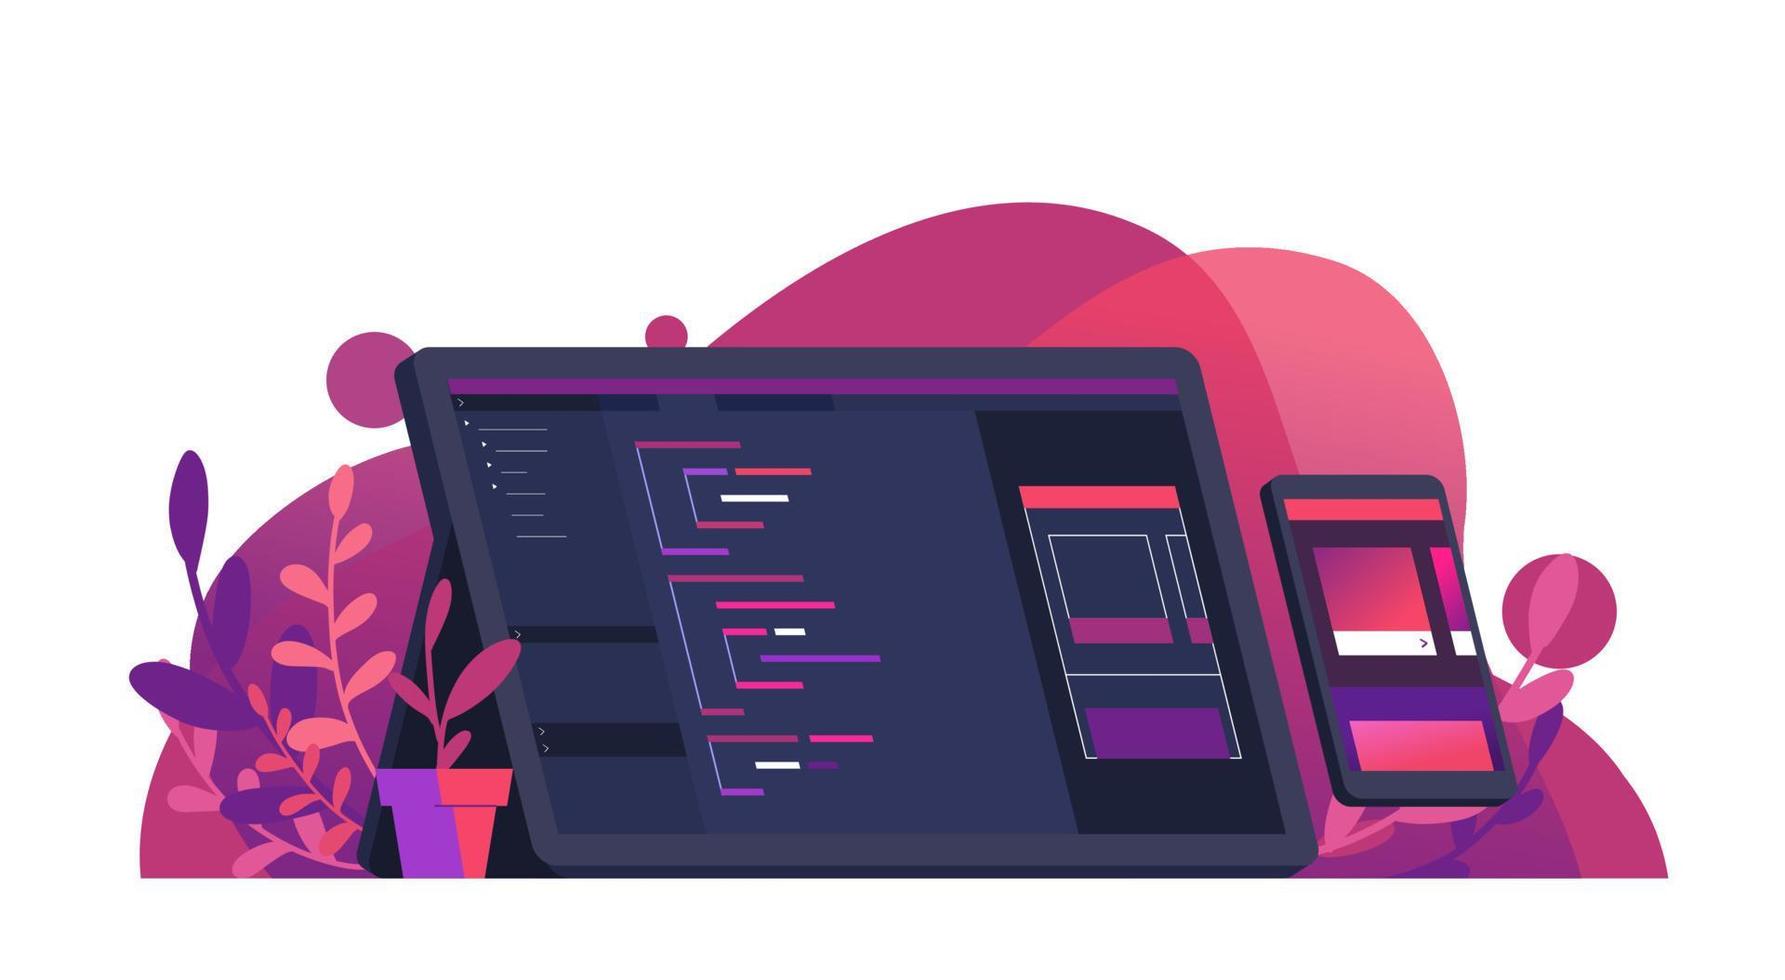 Mobile App Development Coding Program in Computer Monitor and Debugging with Smartphone Flat Vector Illustration with Orange and Purple Color